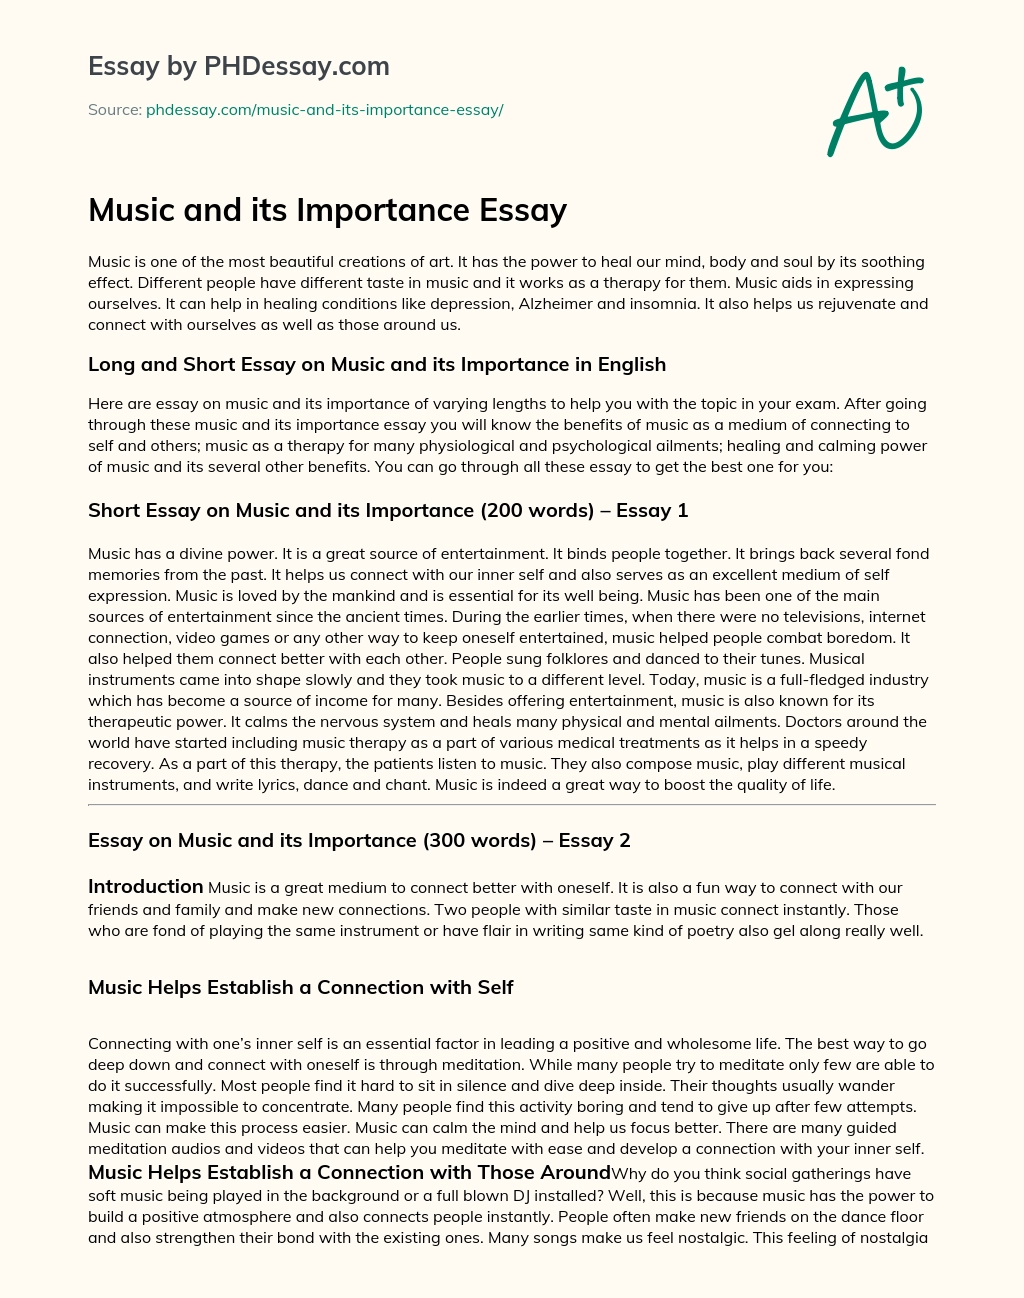 Music and its Importance Essay essay